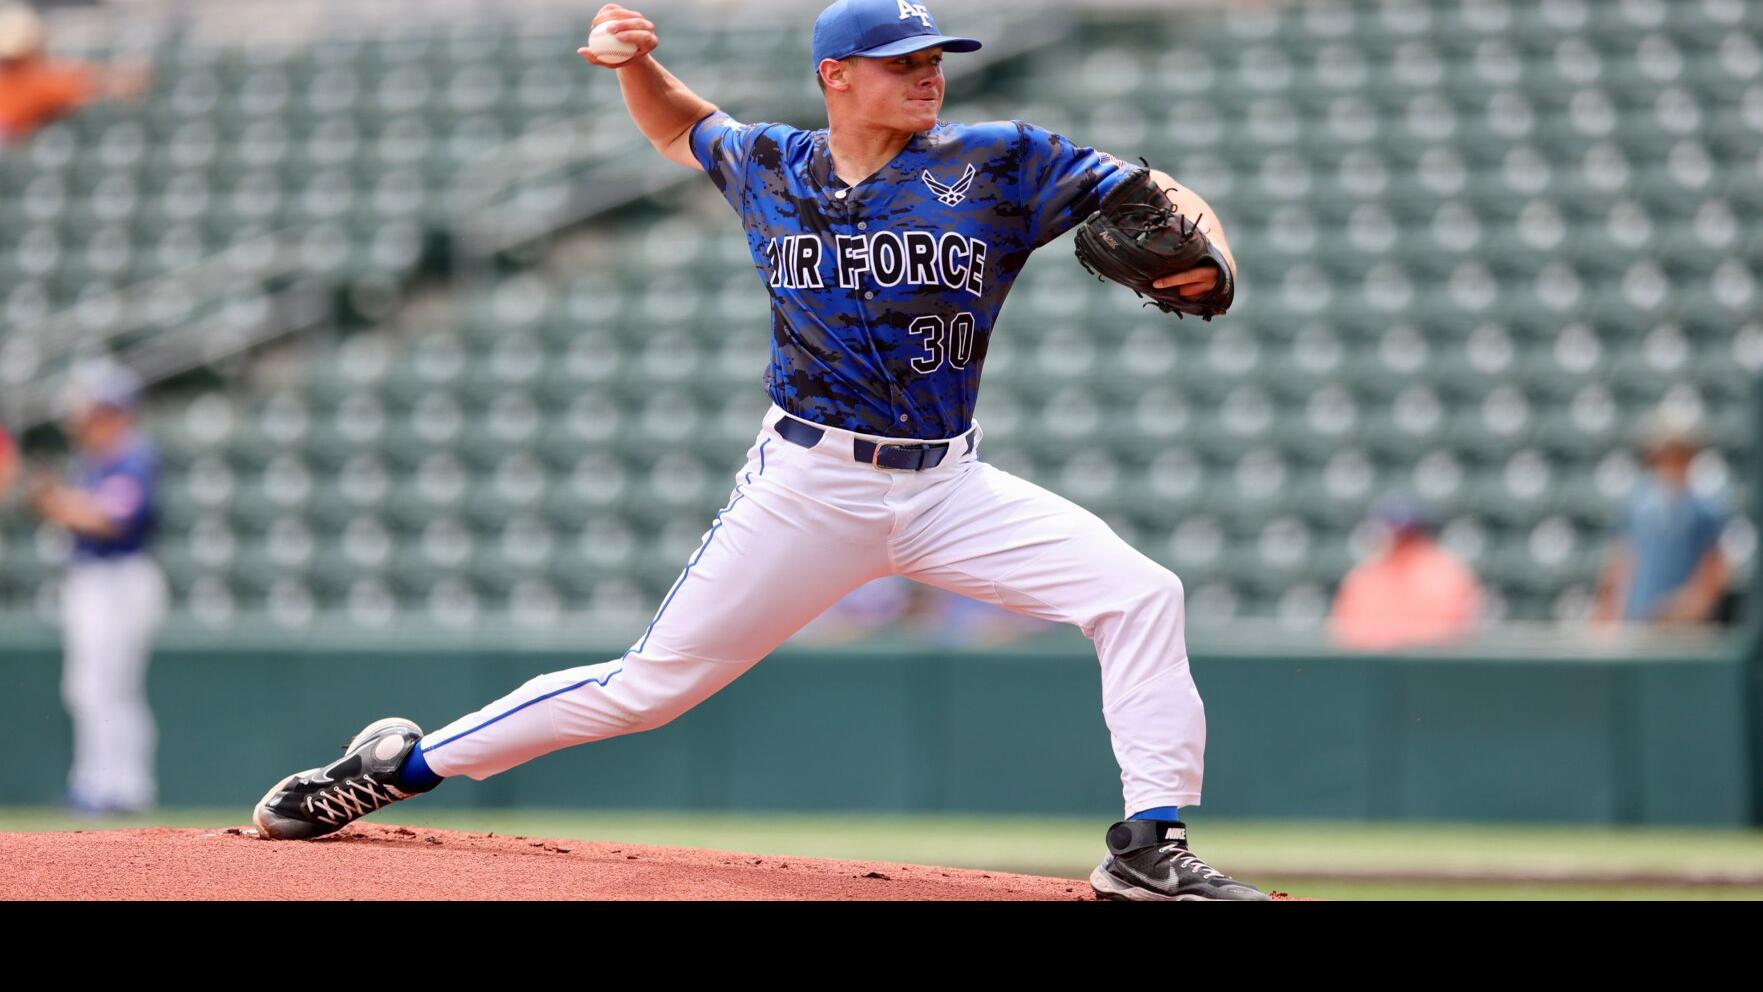 Paul Klee: Air Force baseball makes history in first NCAA